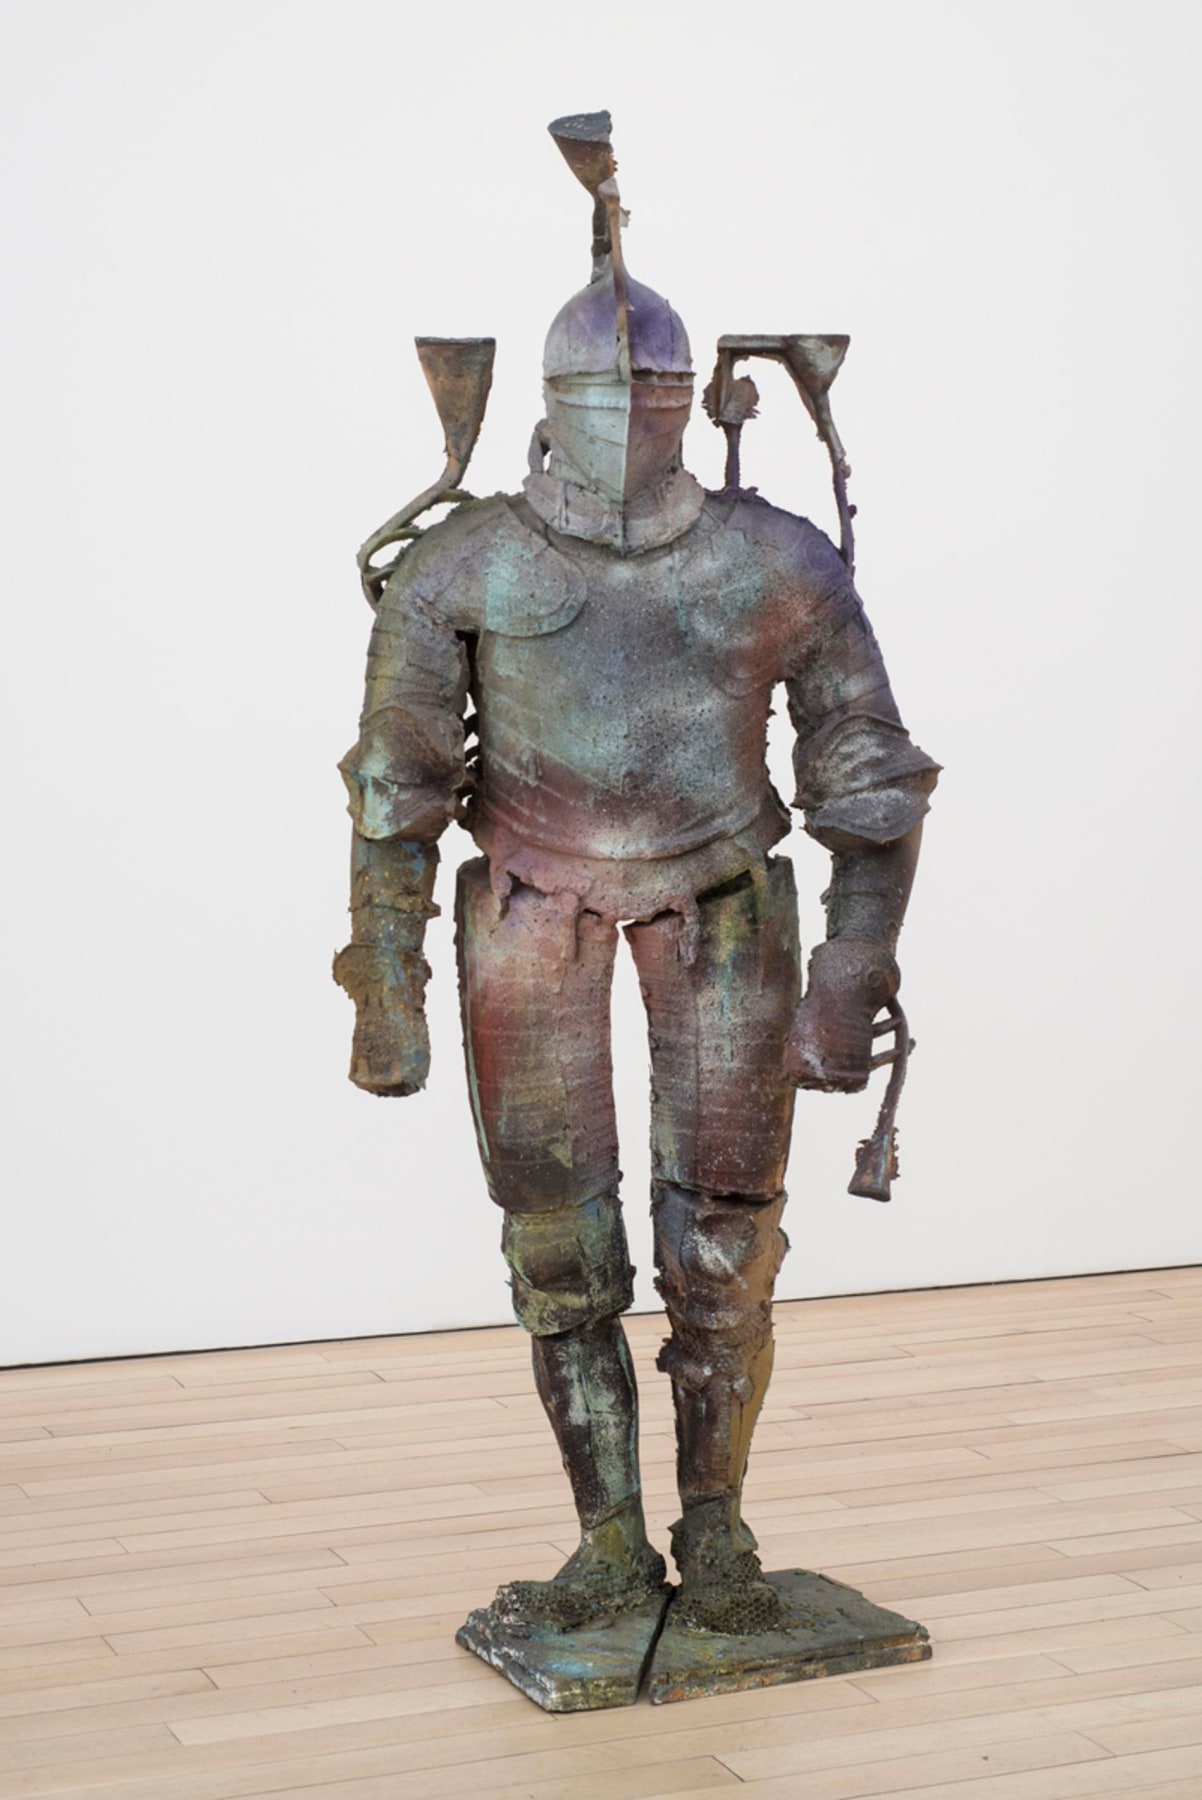 statue of a medieval knight of varying dark hues